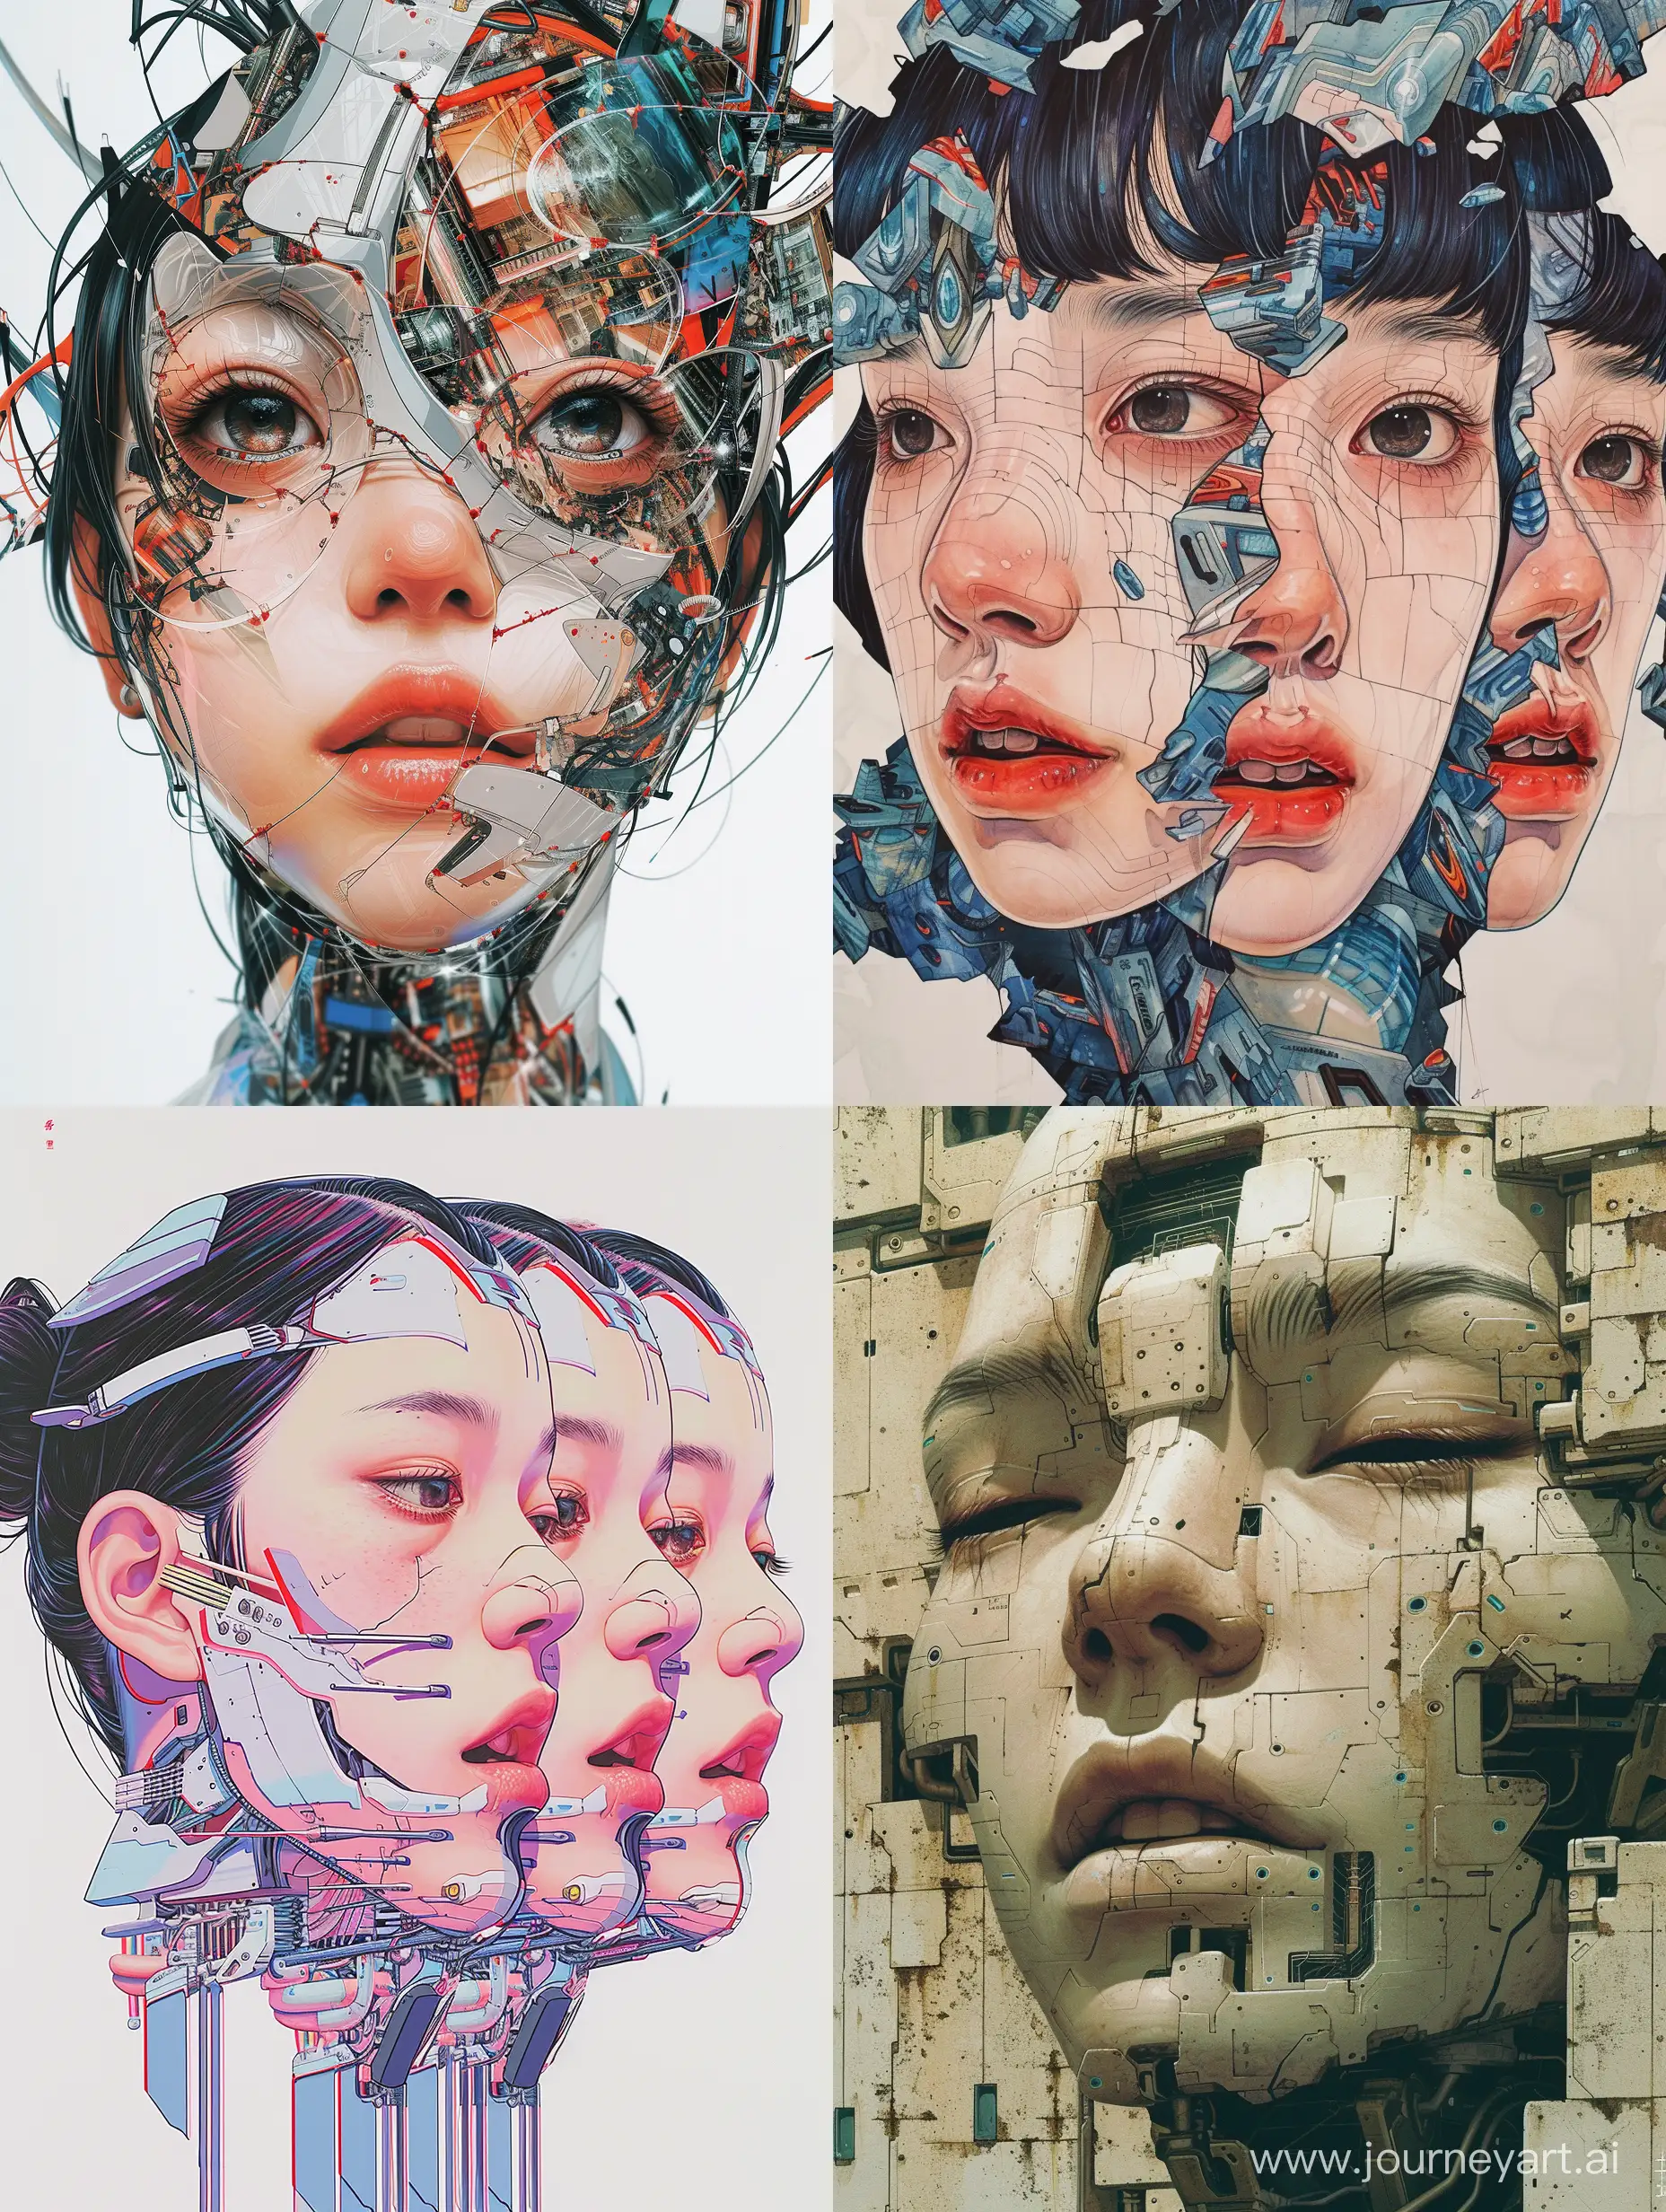 shintaro kago style of a beautifull face made by part of the face multiplicated in different part, cyberpunk realistic neo futuristic shintaro kago, japan style